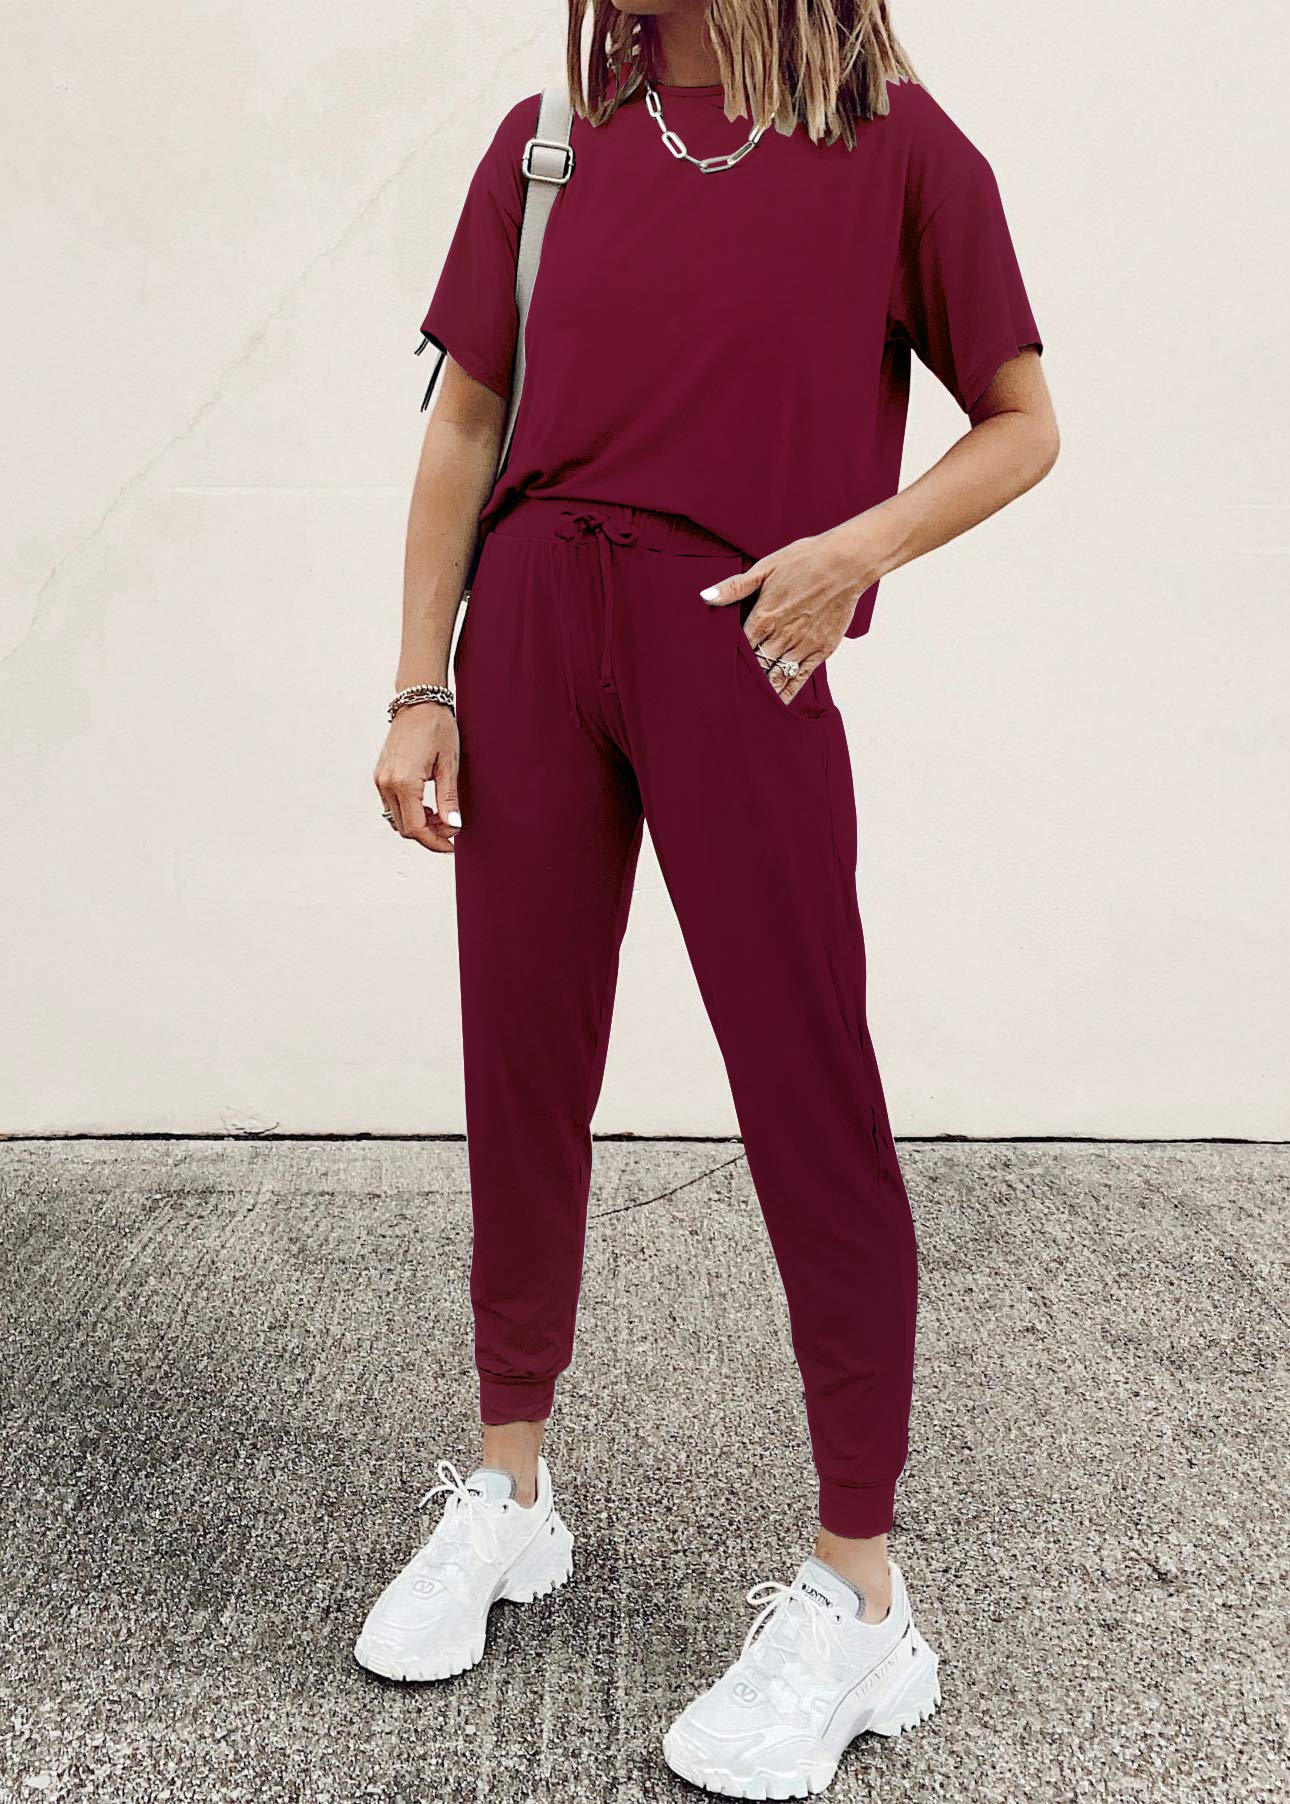 PRETTYGARDEN Women's Two Piece Outfit Short Sleeve Pullover with Drawstring Long Pants Tracksuit Jogger Set